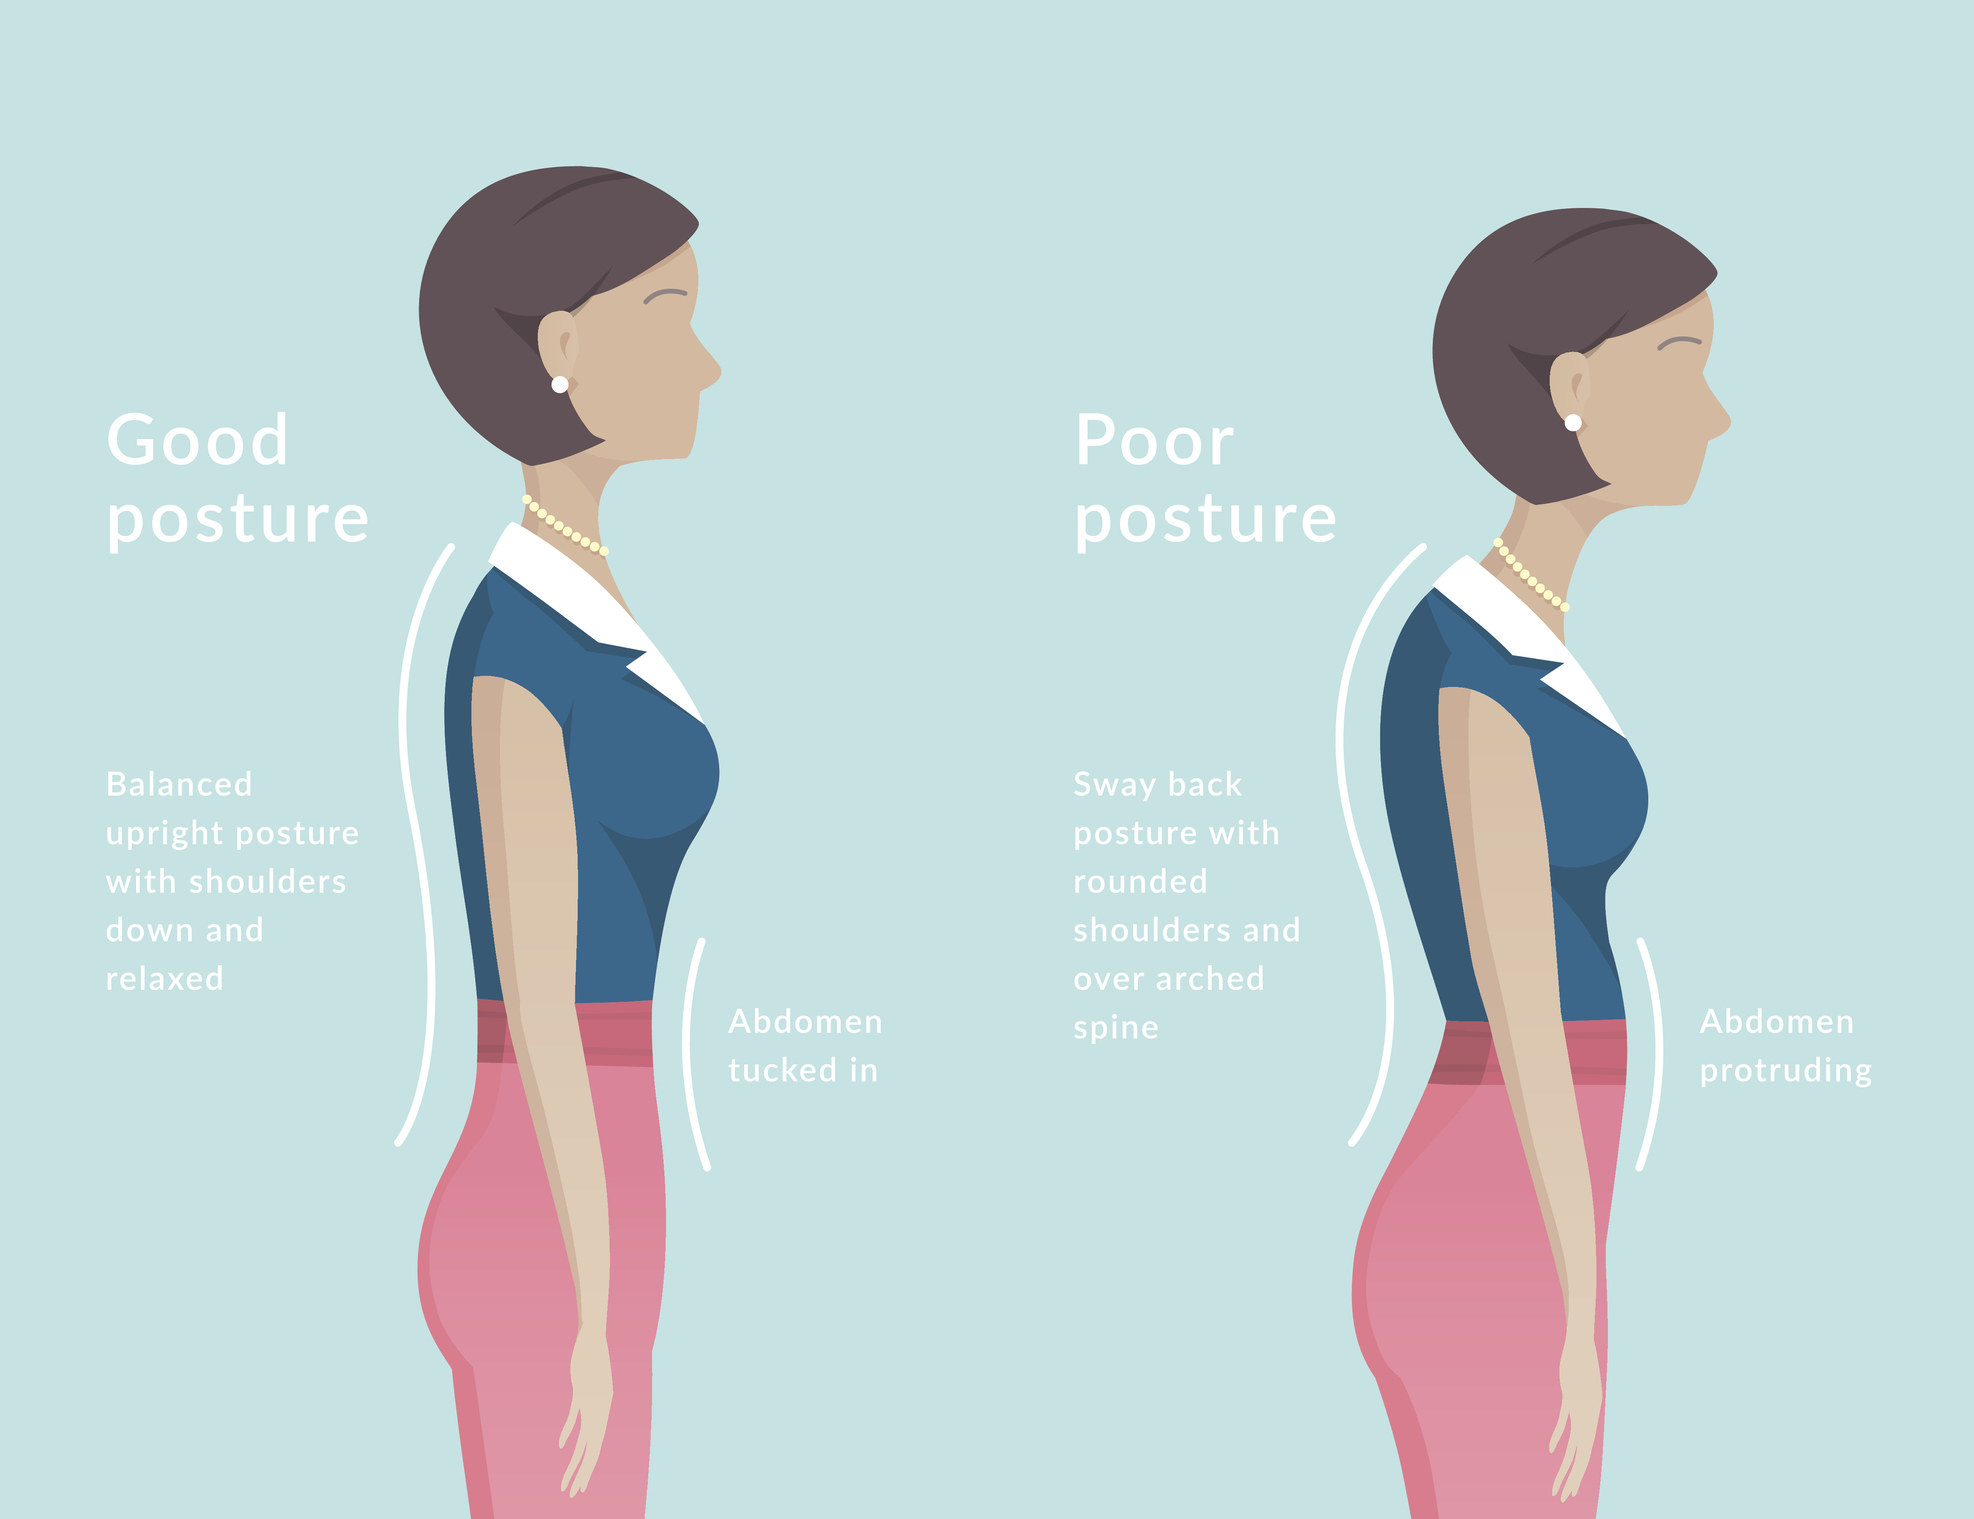 Retro style ergonomics diagram showing ideal posture. Diagram shows a woman standing with balanced upright posture. This is an editable EPS 10 vector illustration.